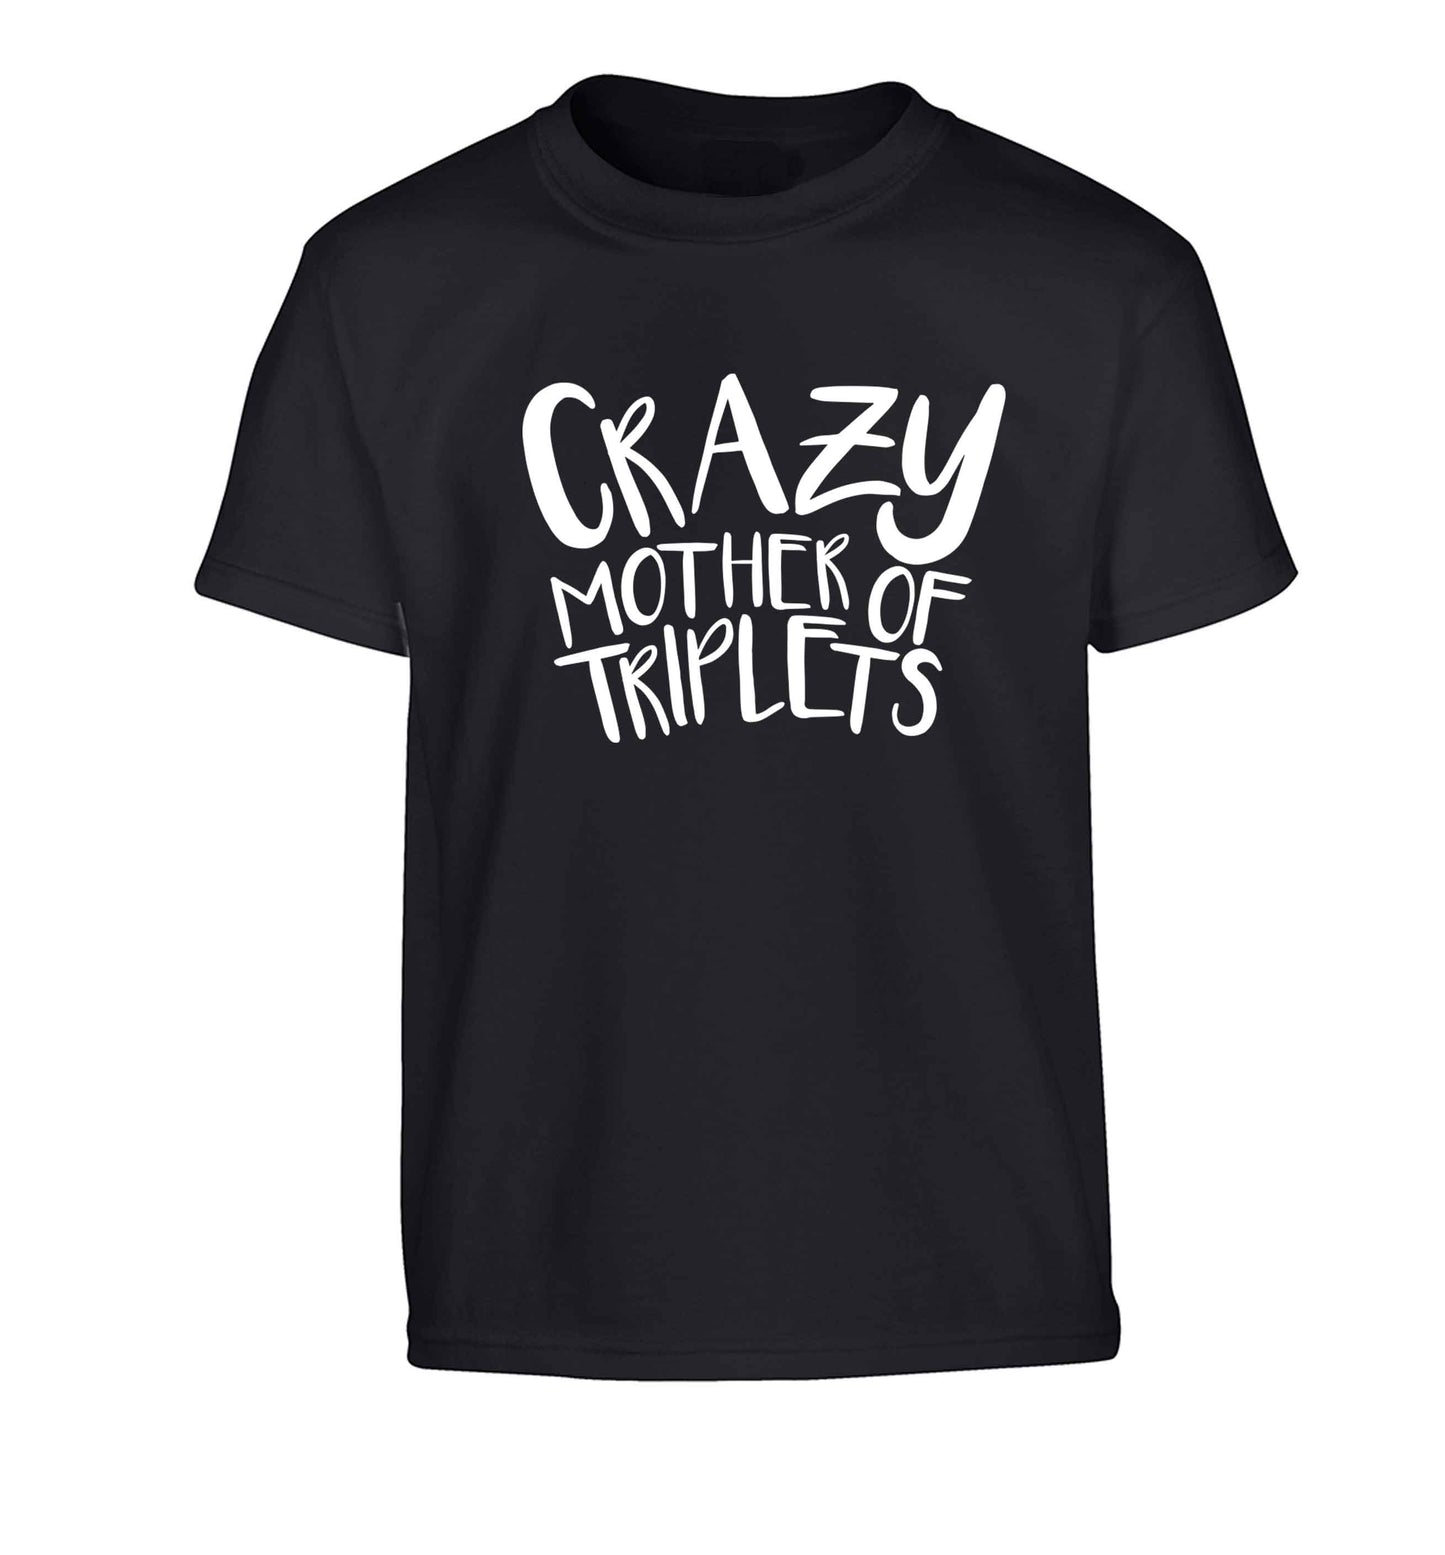 Crazy mother of triplets Children's black Tshirt 12-13 Years